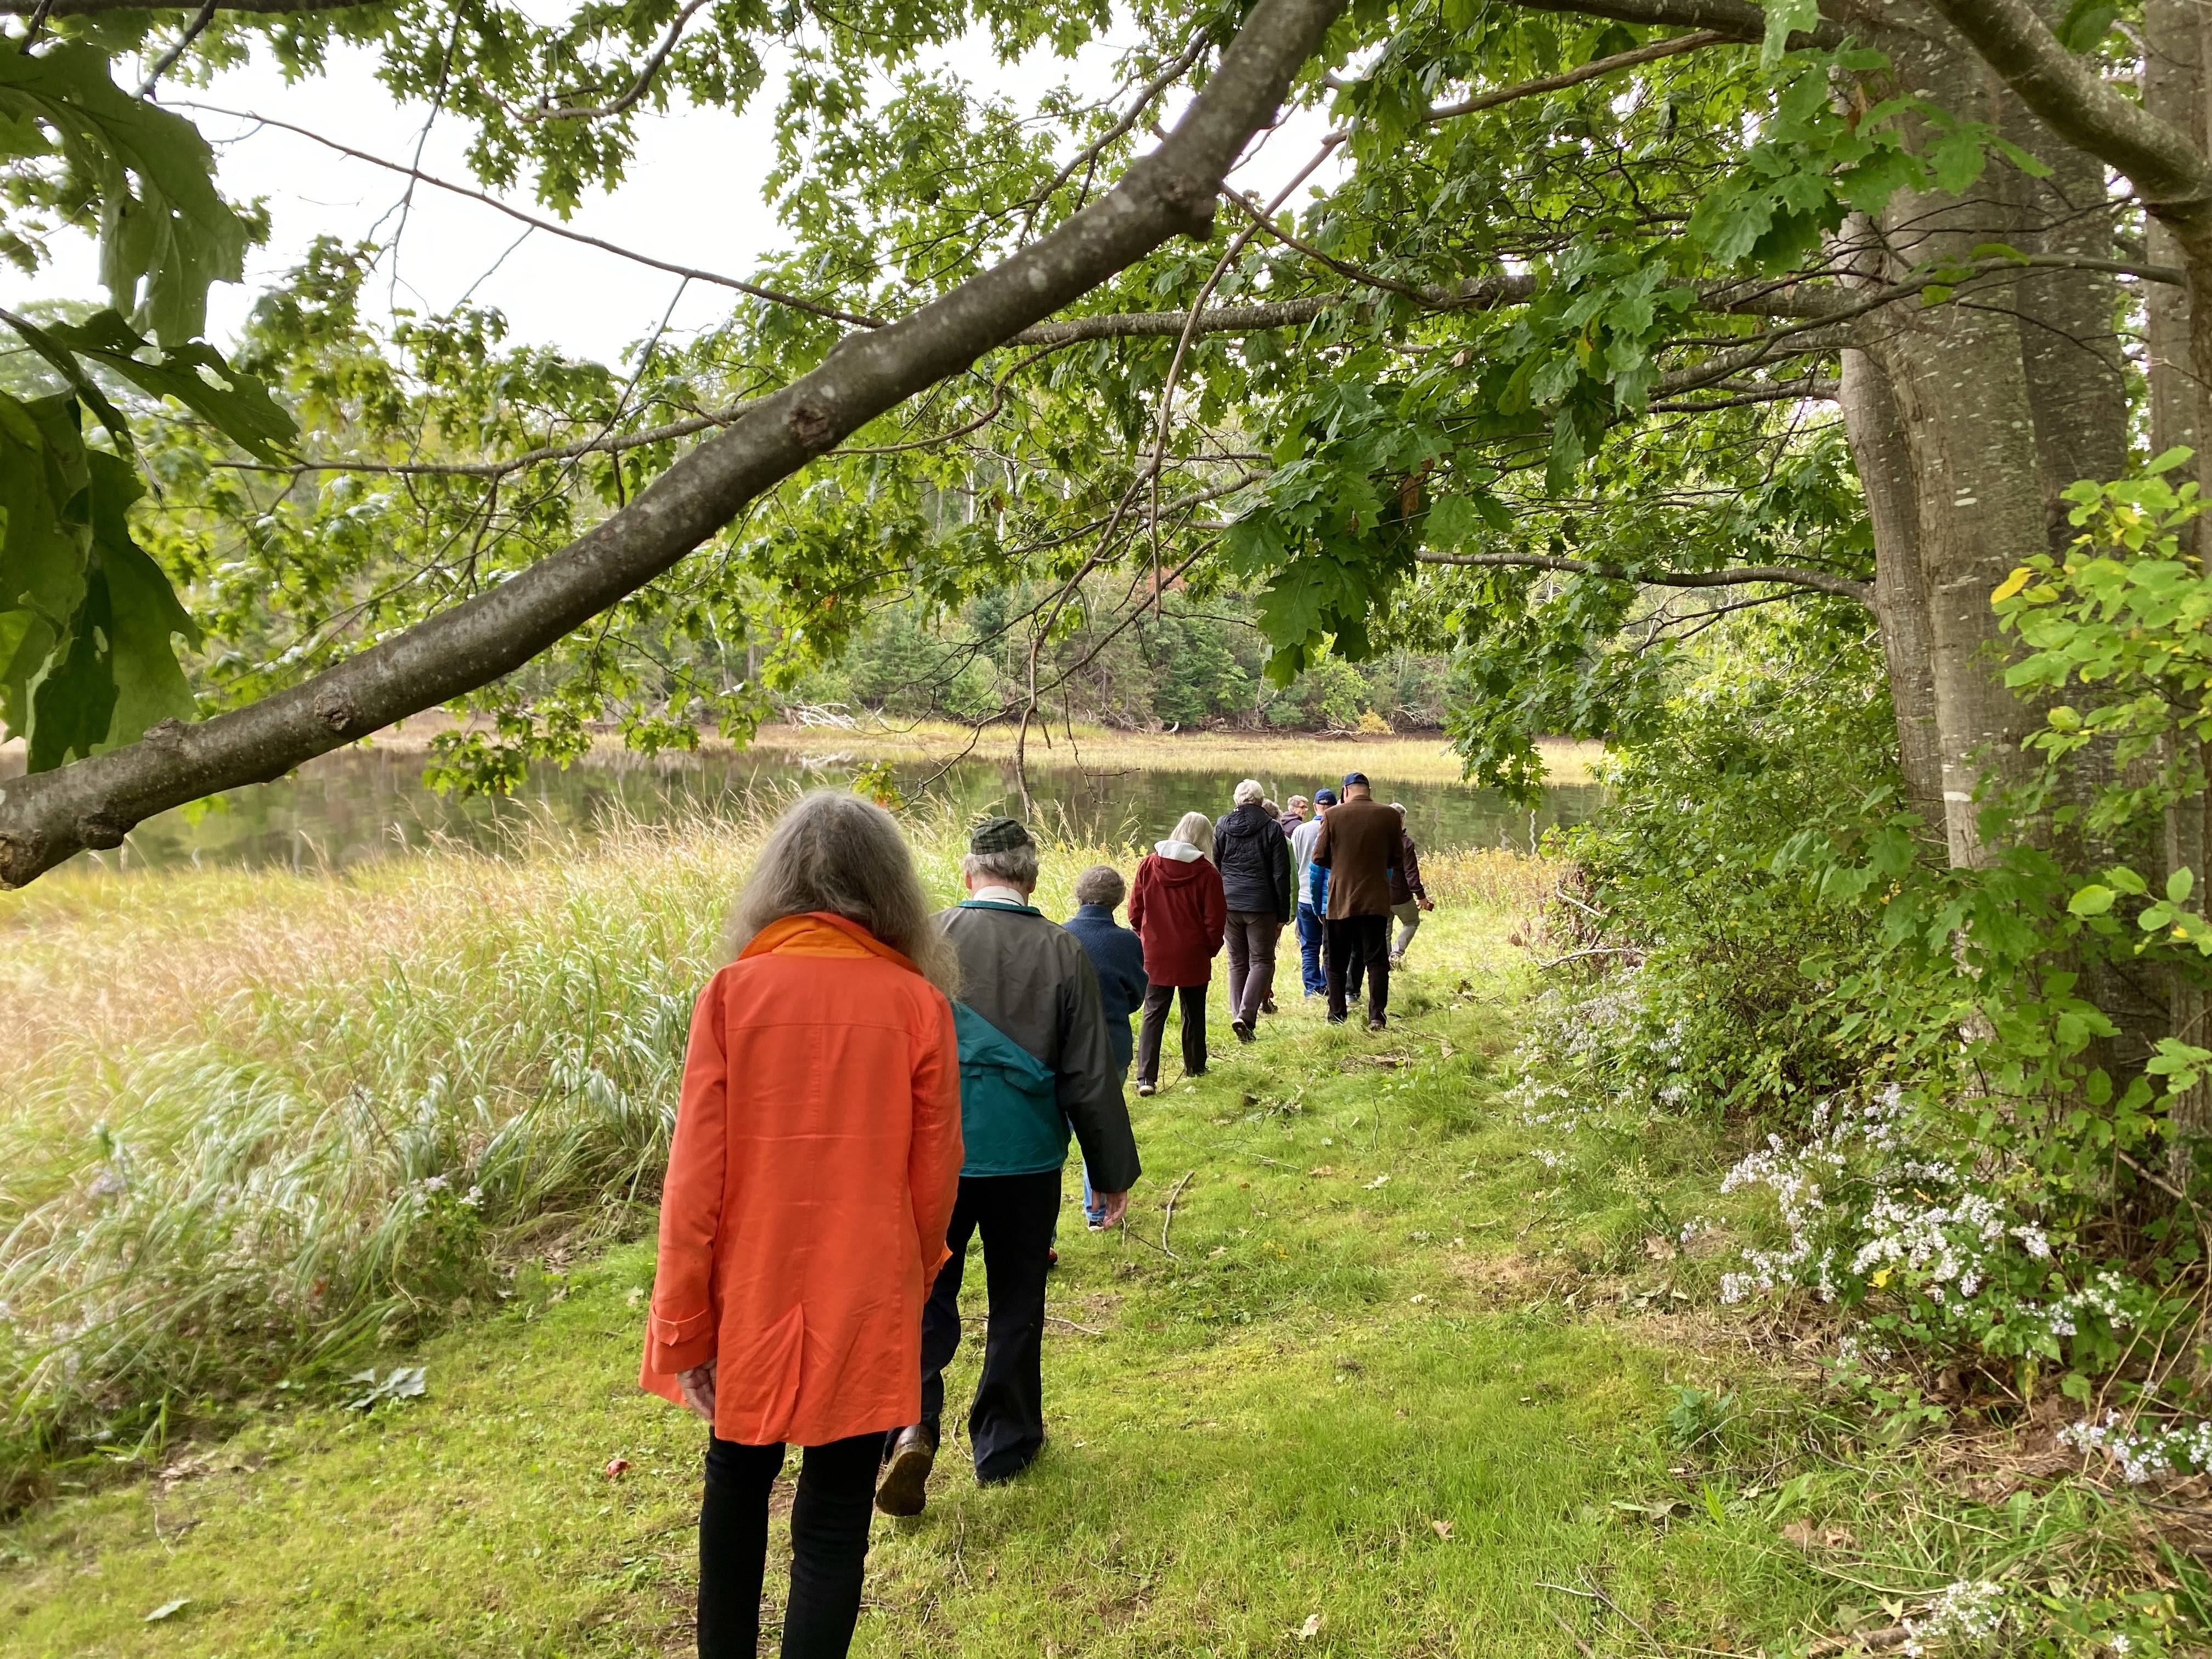  People walking in a line underneath a tree canopy. There is water in the distance.